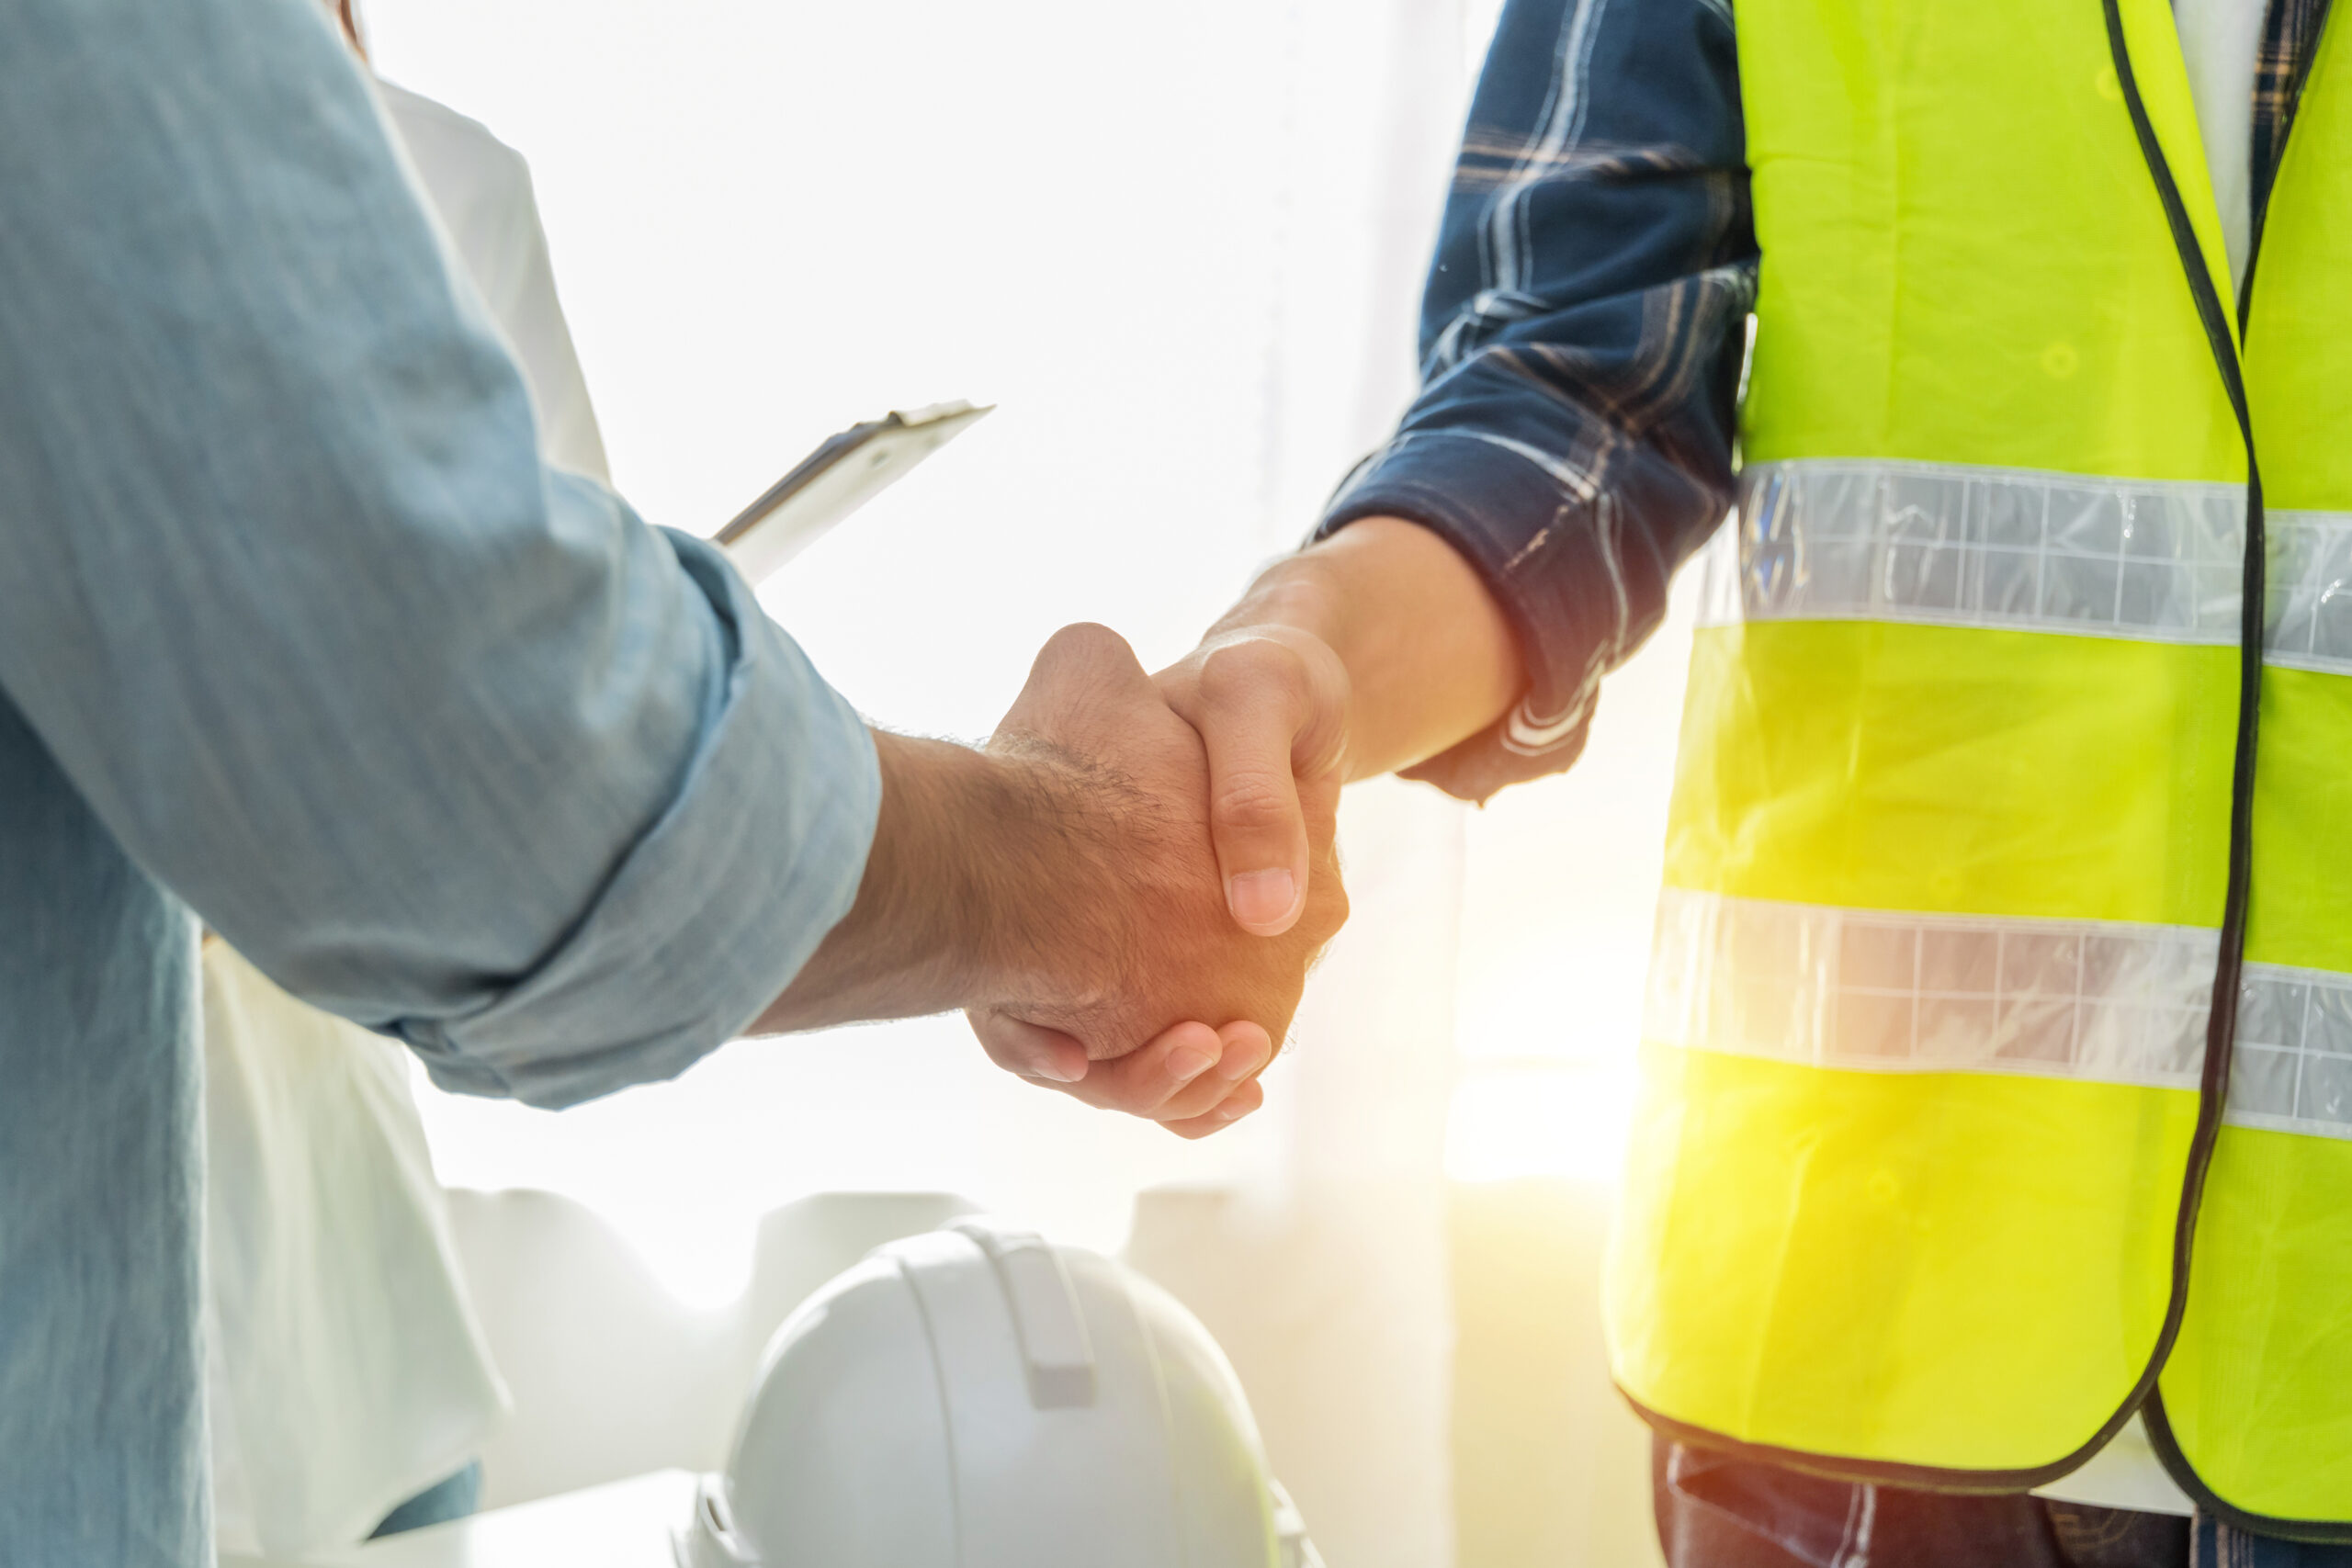 When contractors are looking for a surety agent, they should consider several factors to ensure they find the right fit for their business.